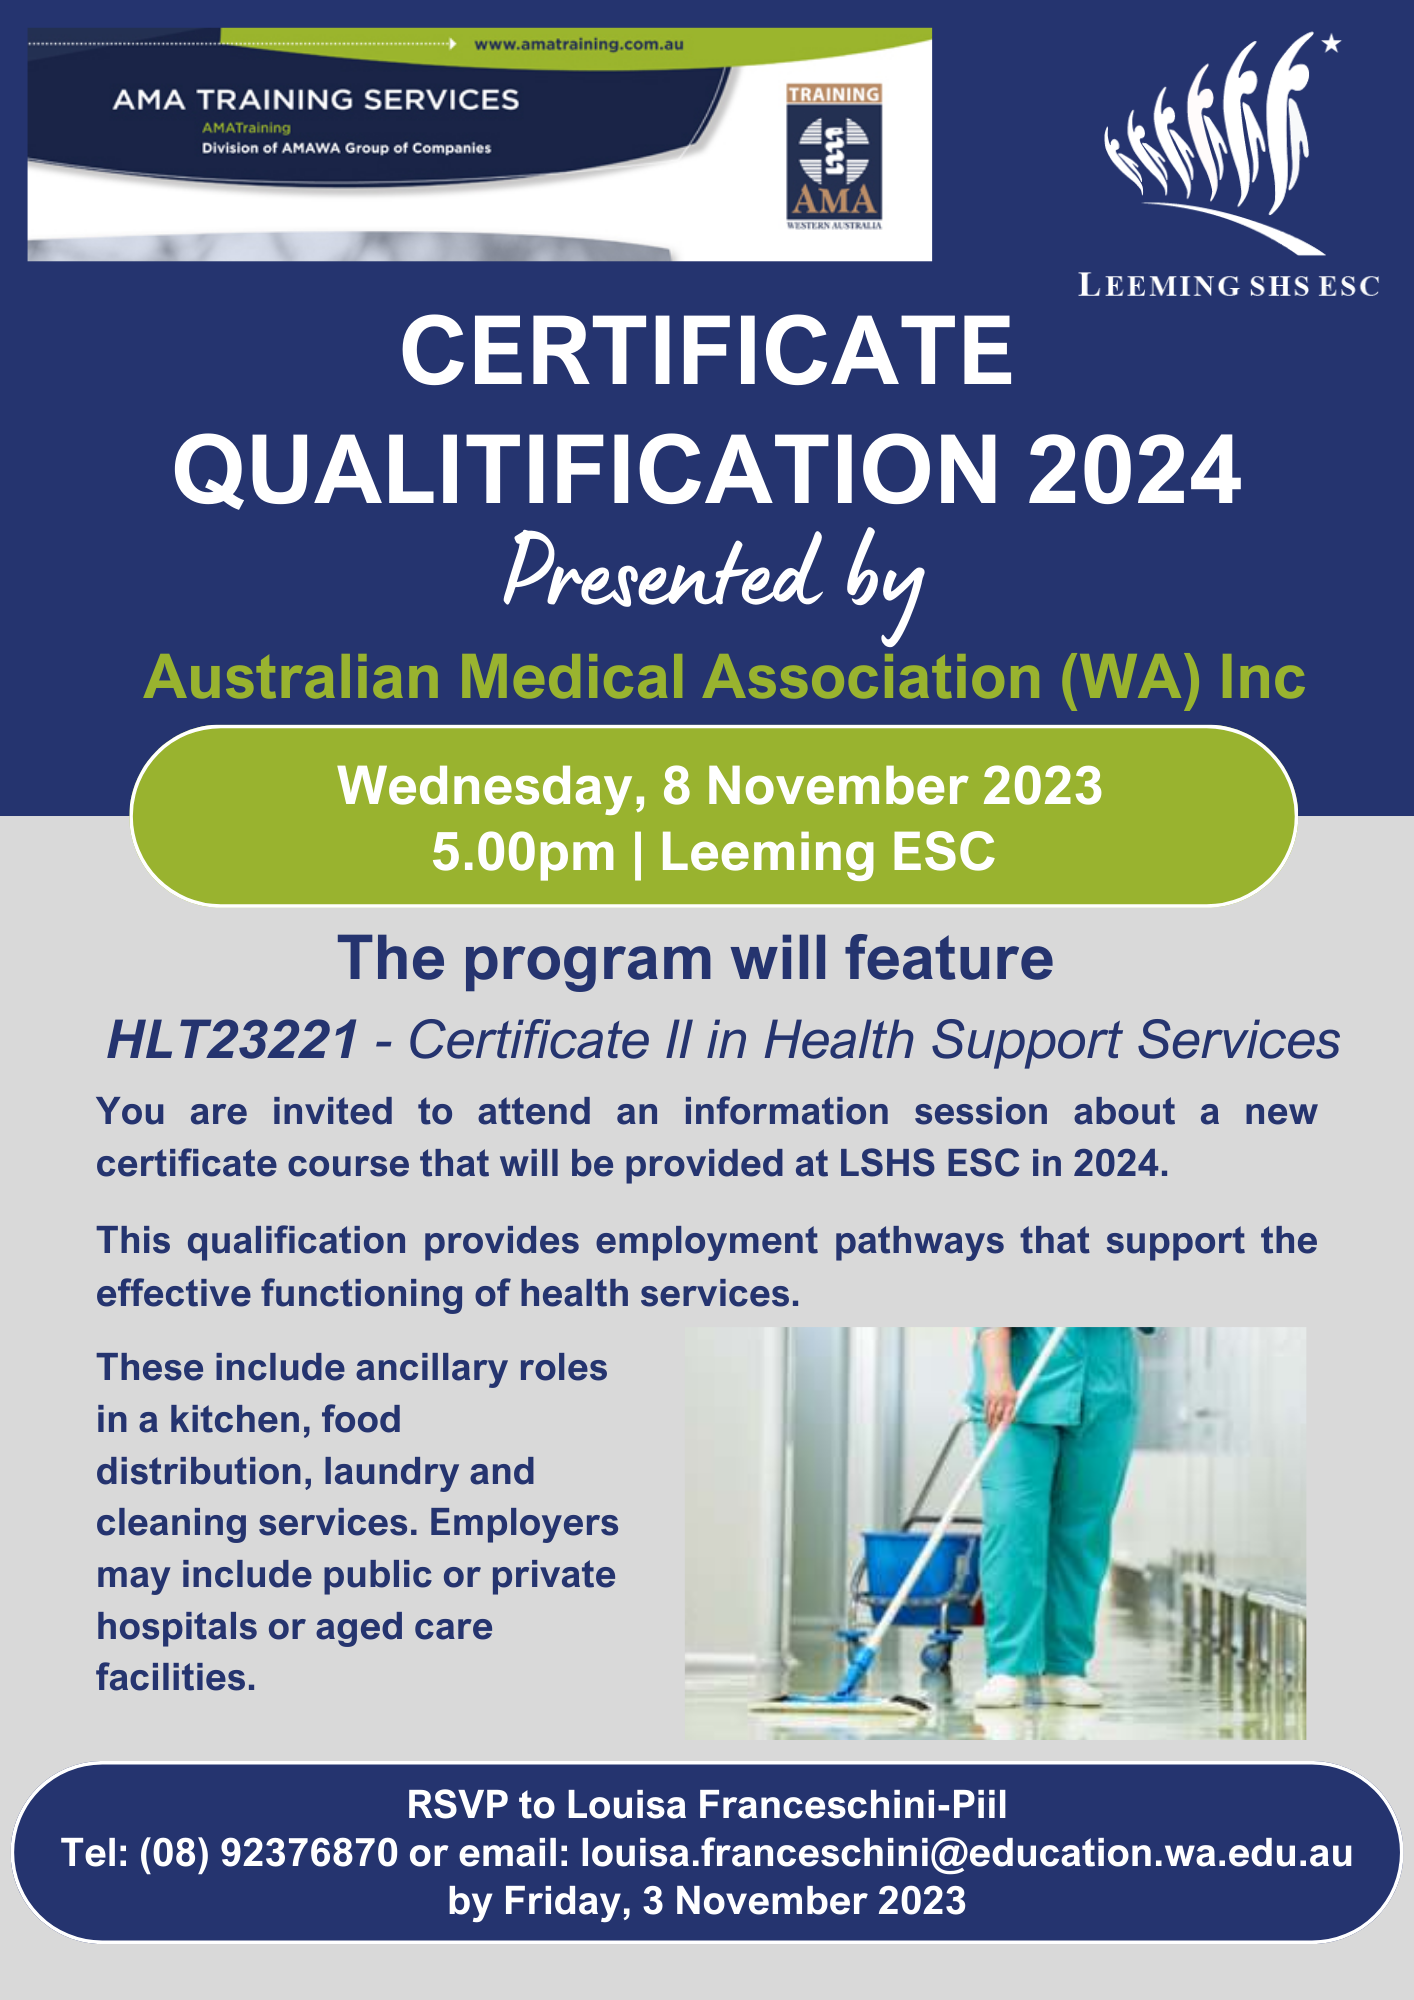 Certificate Qualification 2024 Session 8 November 2023 